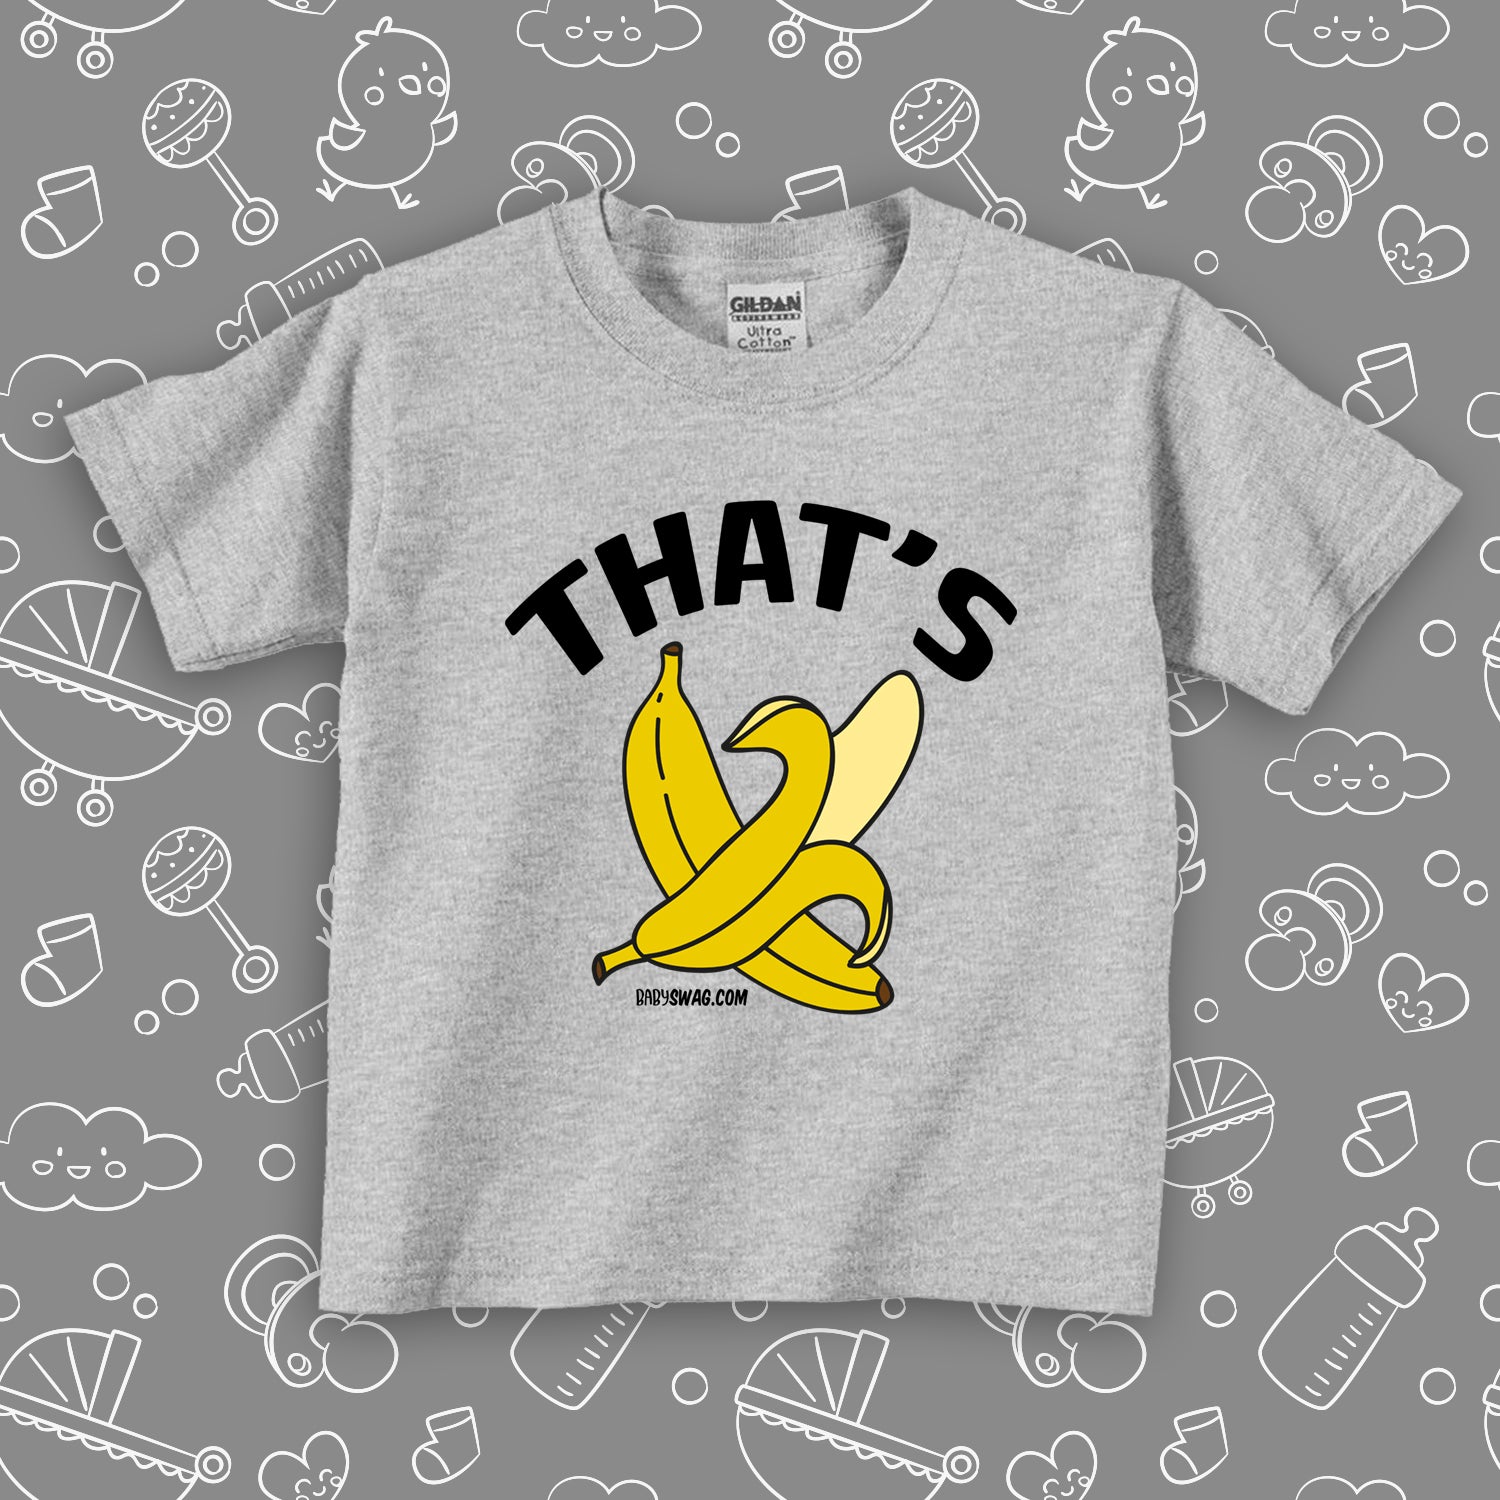 Grey toddler graphic tee with saying "That's Bananas" and an image of two bananas.